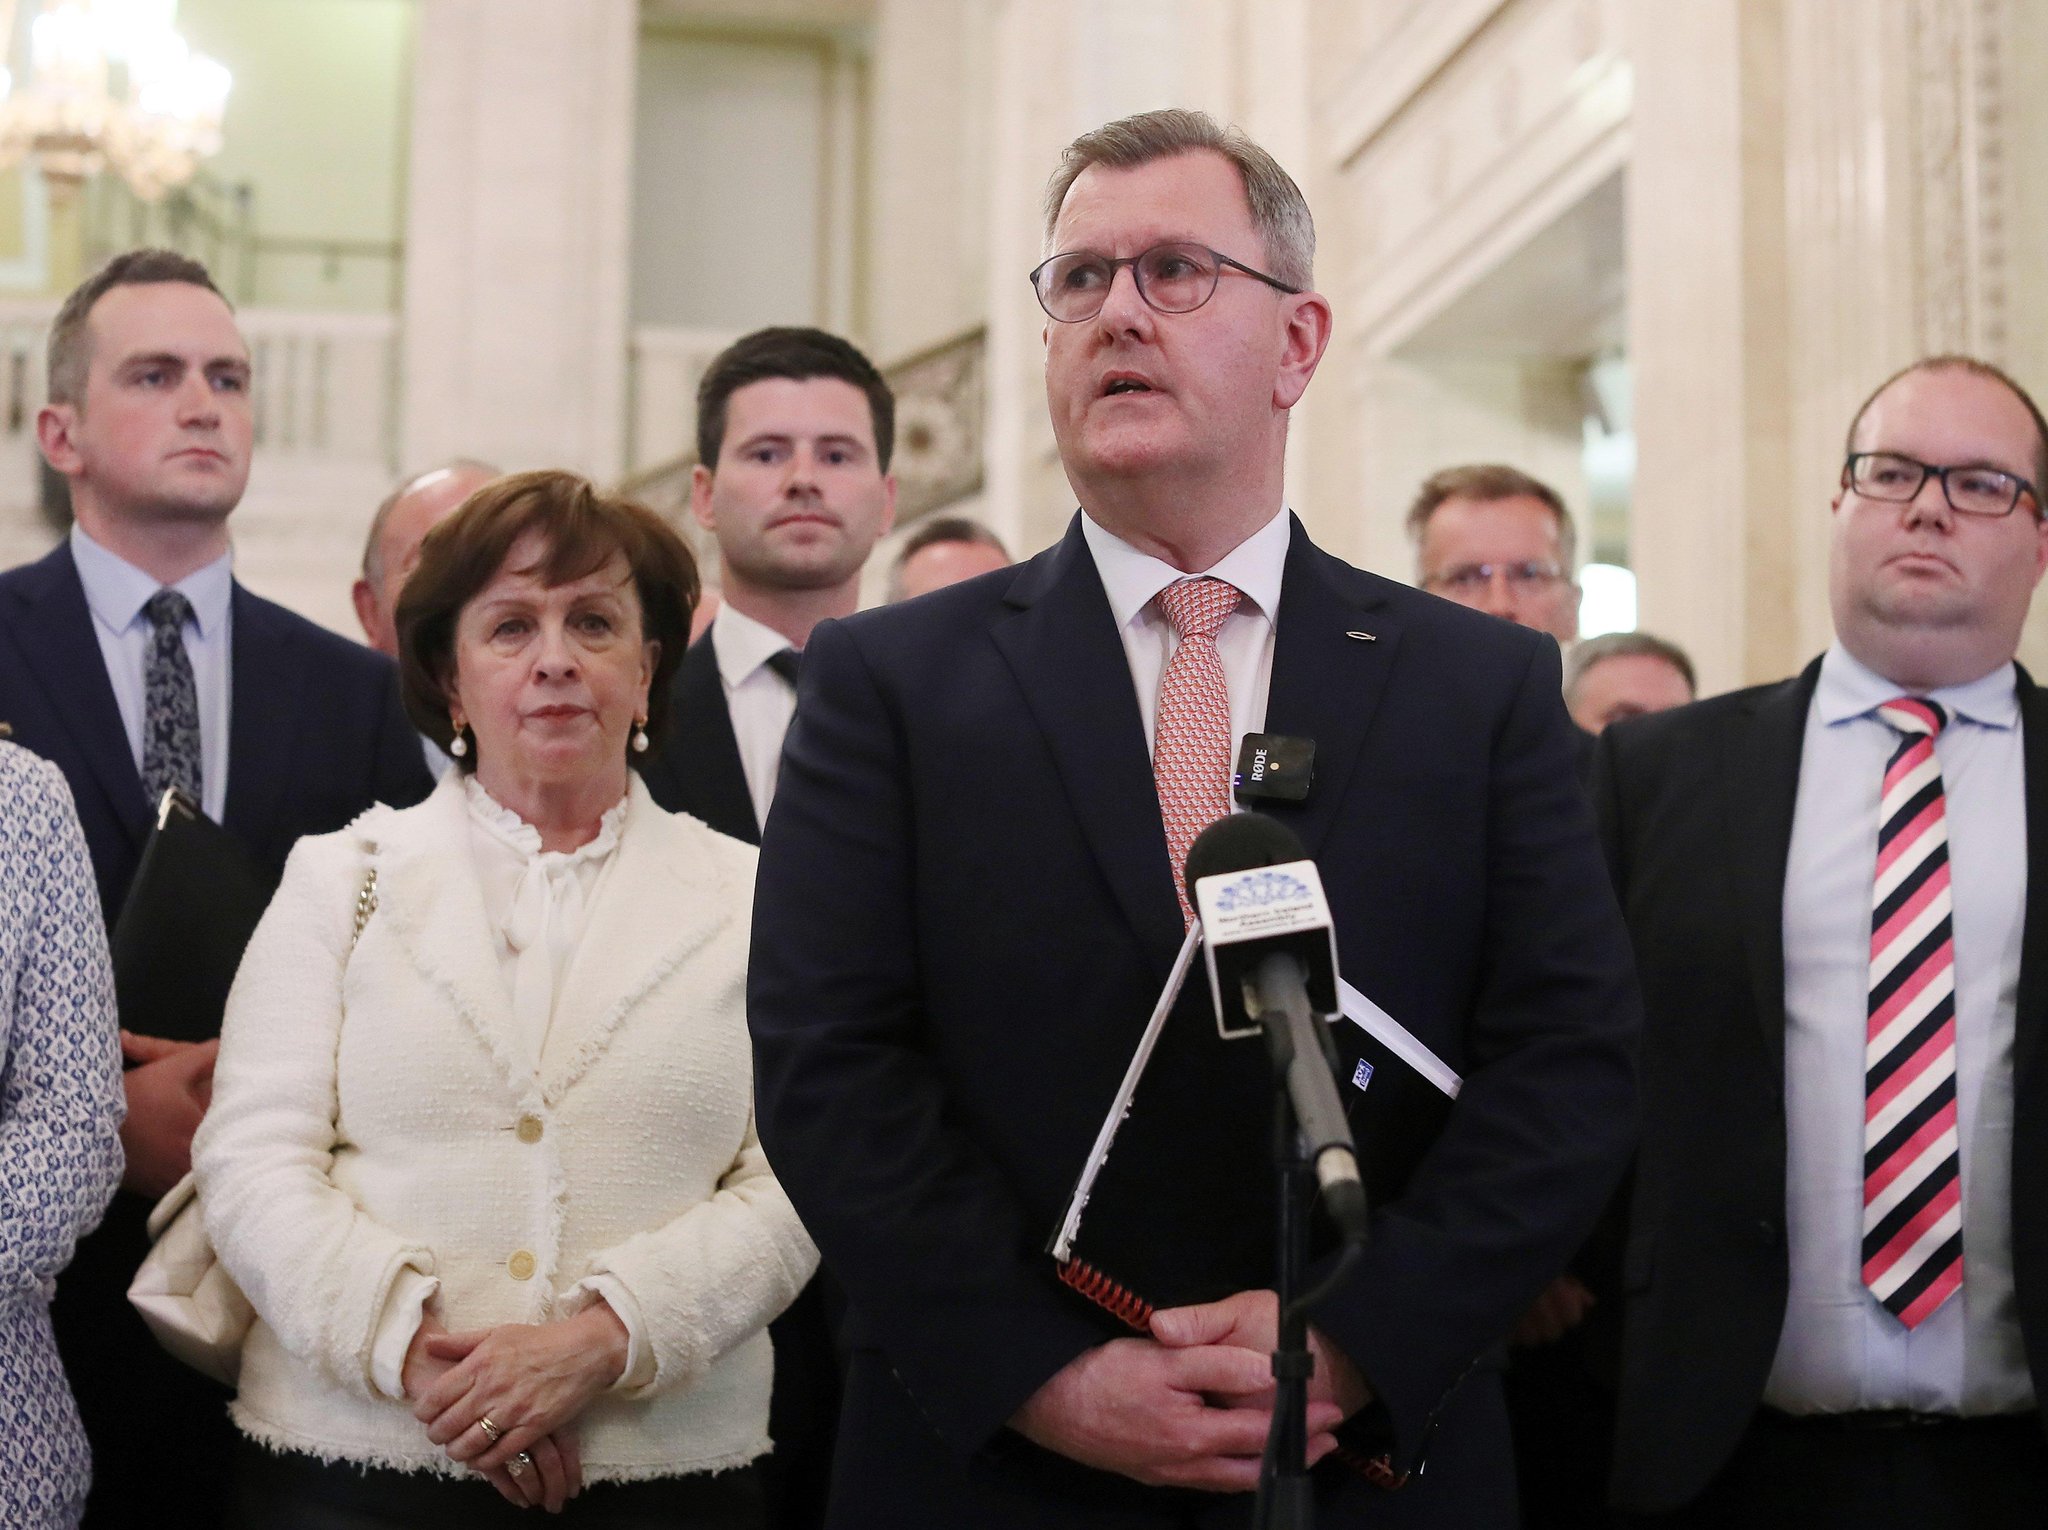 DUP will decide tomorrow whether to nominate Stormont Speaker – Donaldson